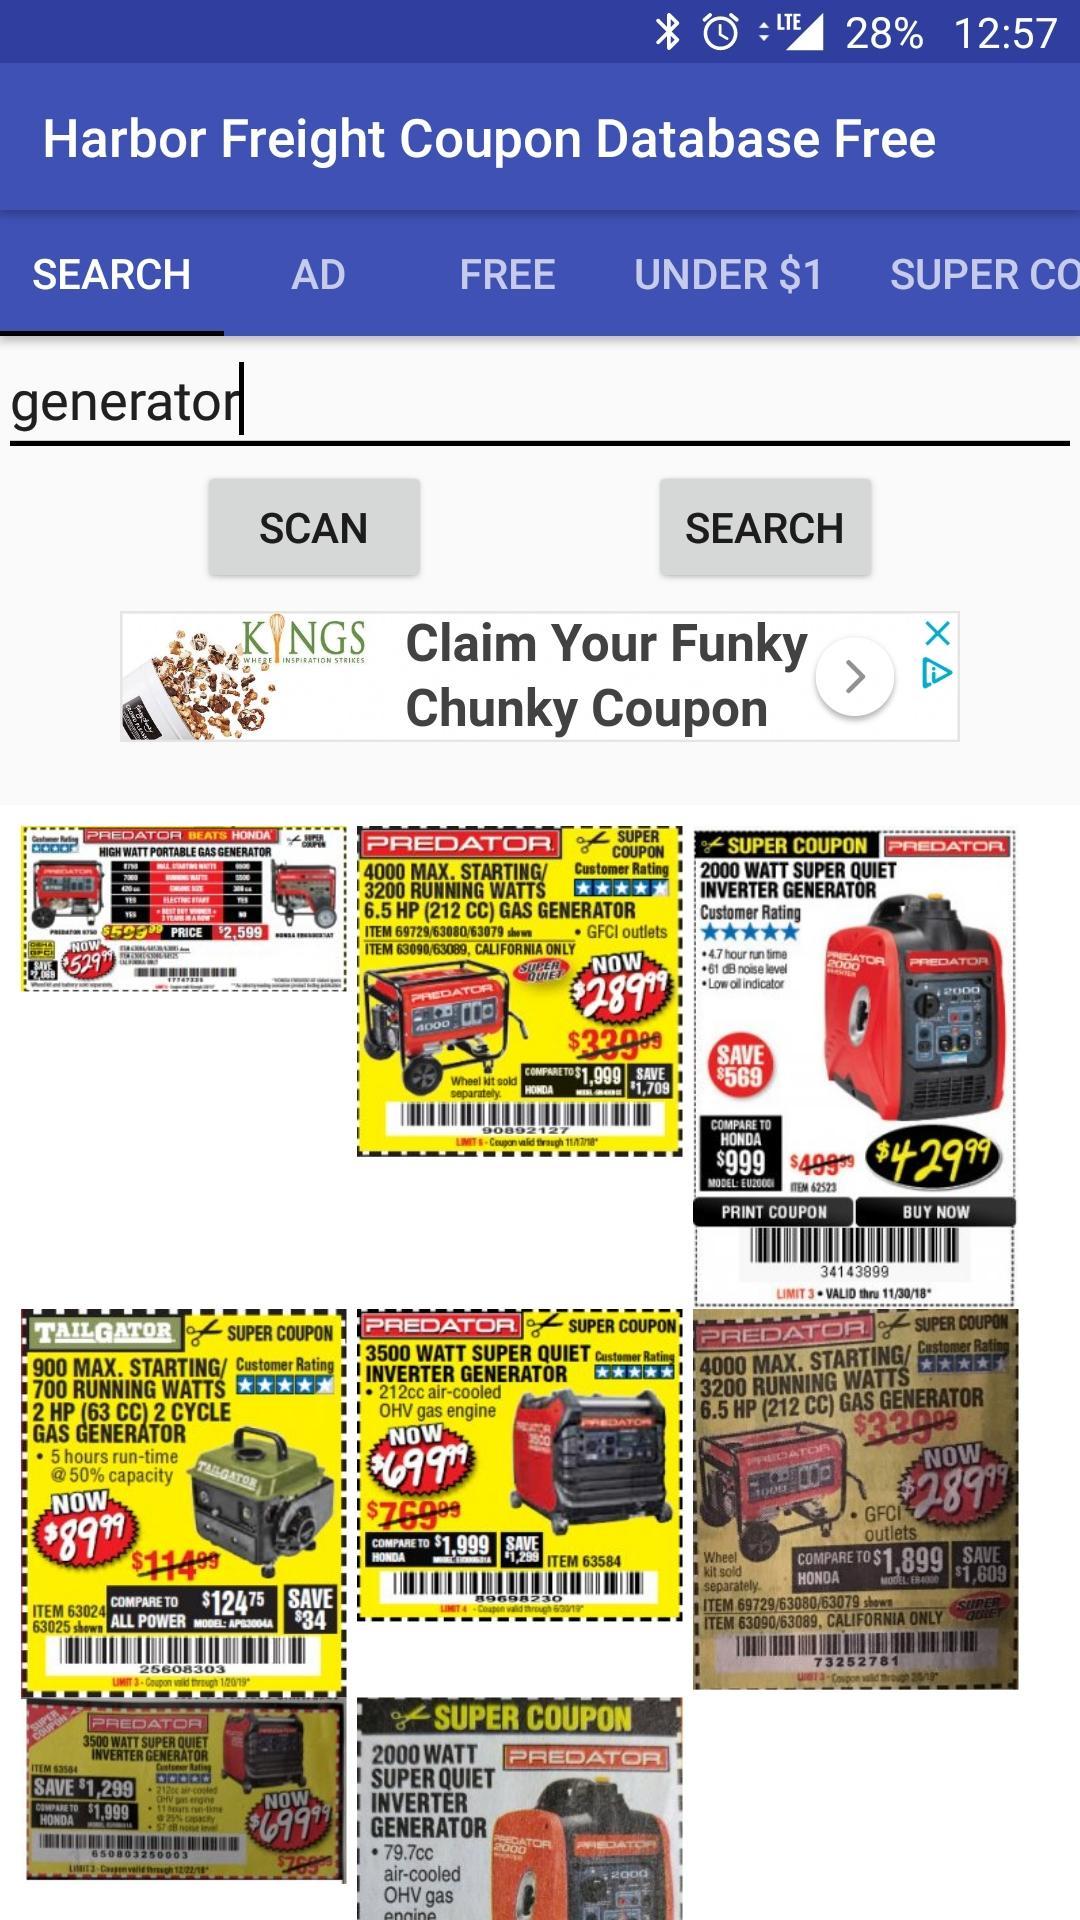 Harbor Freight Coupon Database Hfqpdb For Android Apk Download